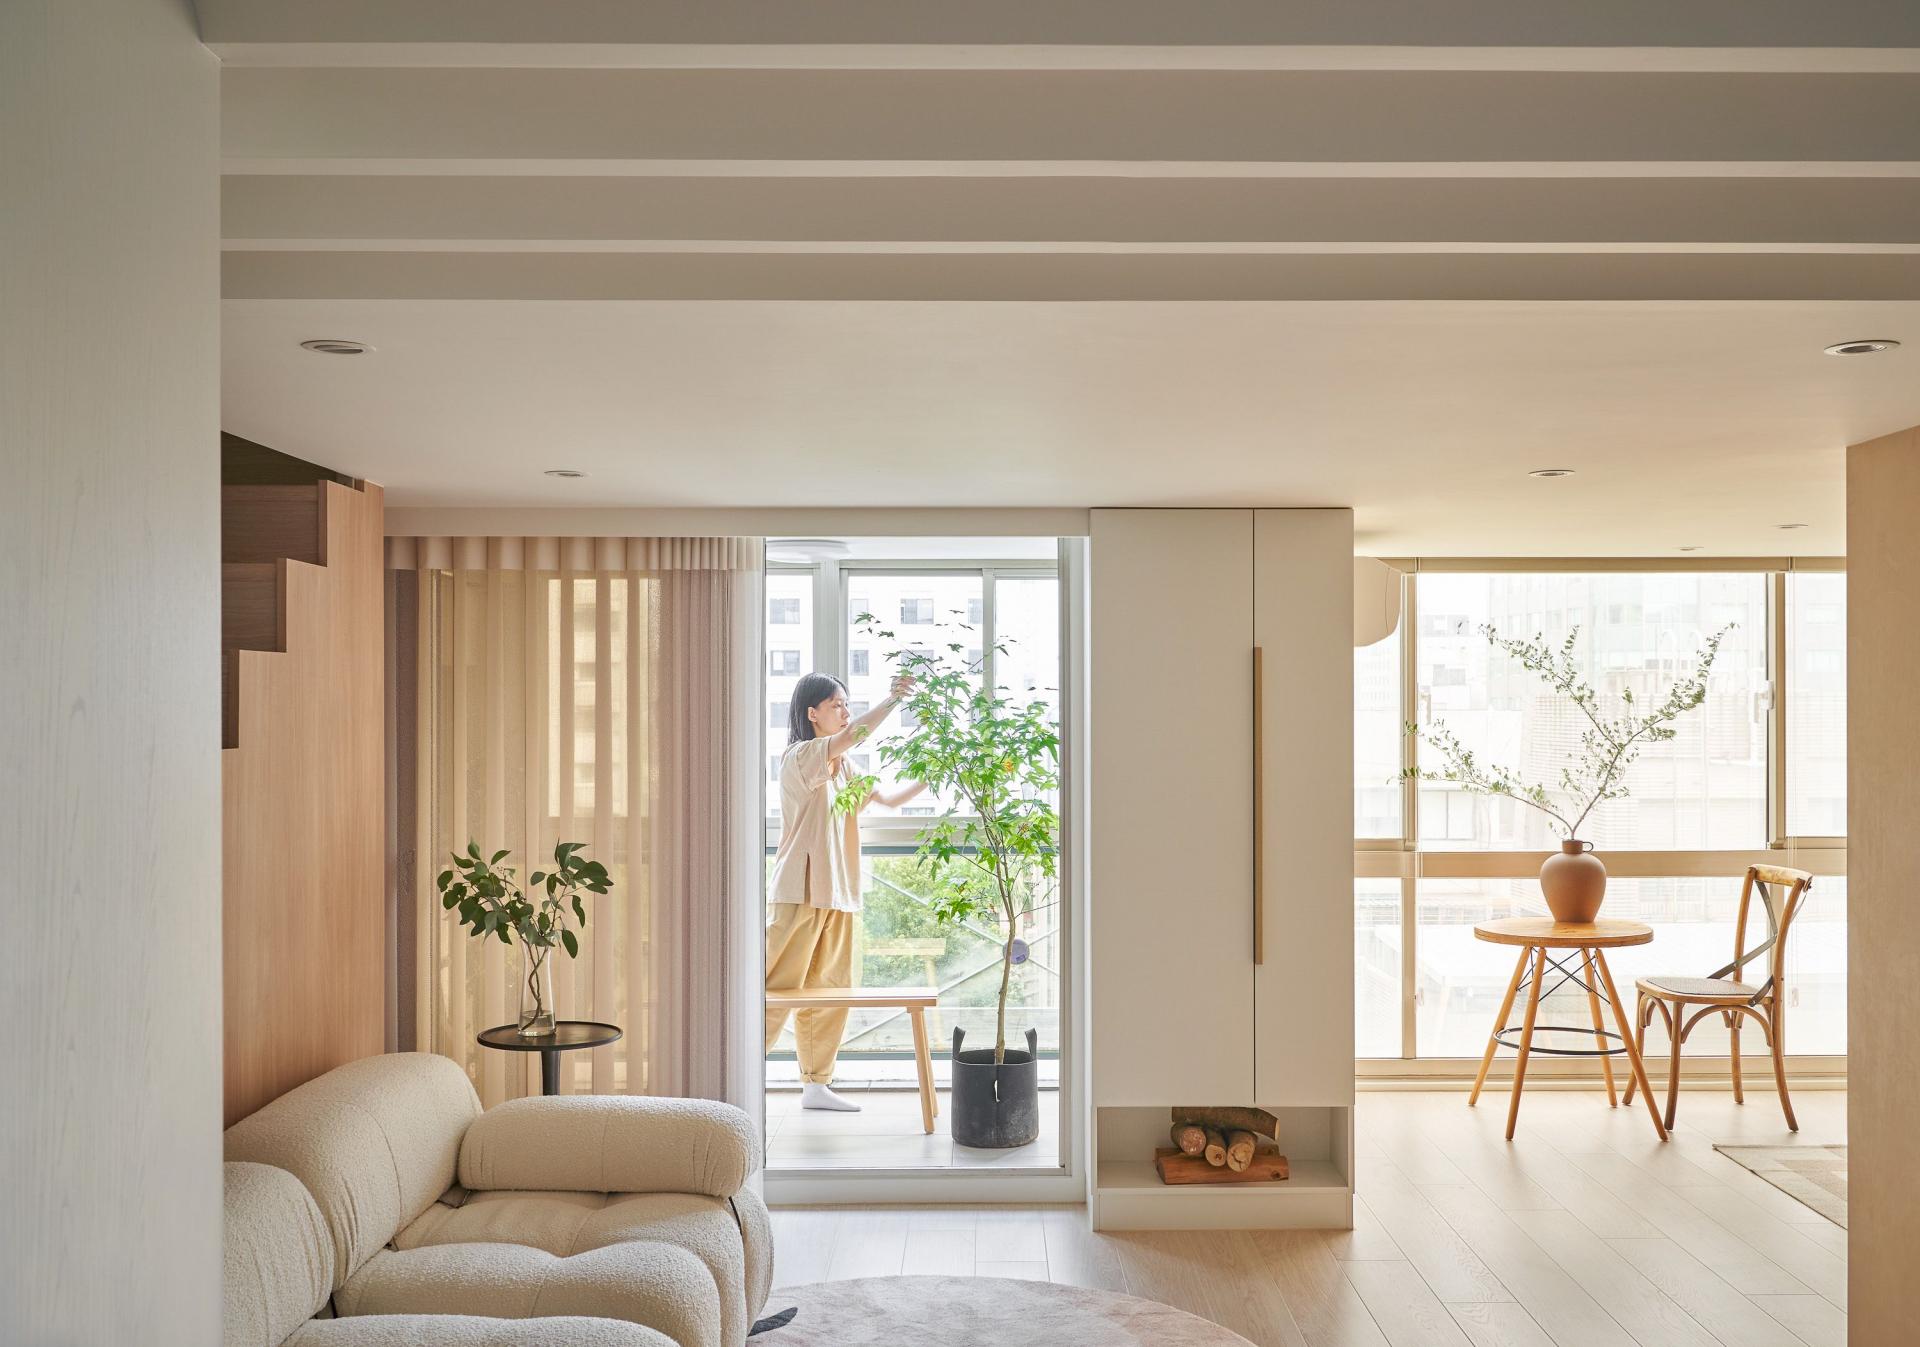 Inside a 419 sq. ft. home in Taipei that masters "old meet new"